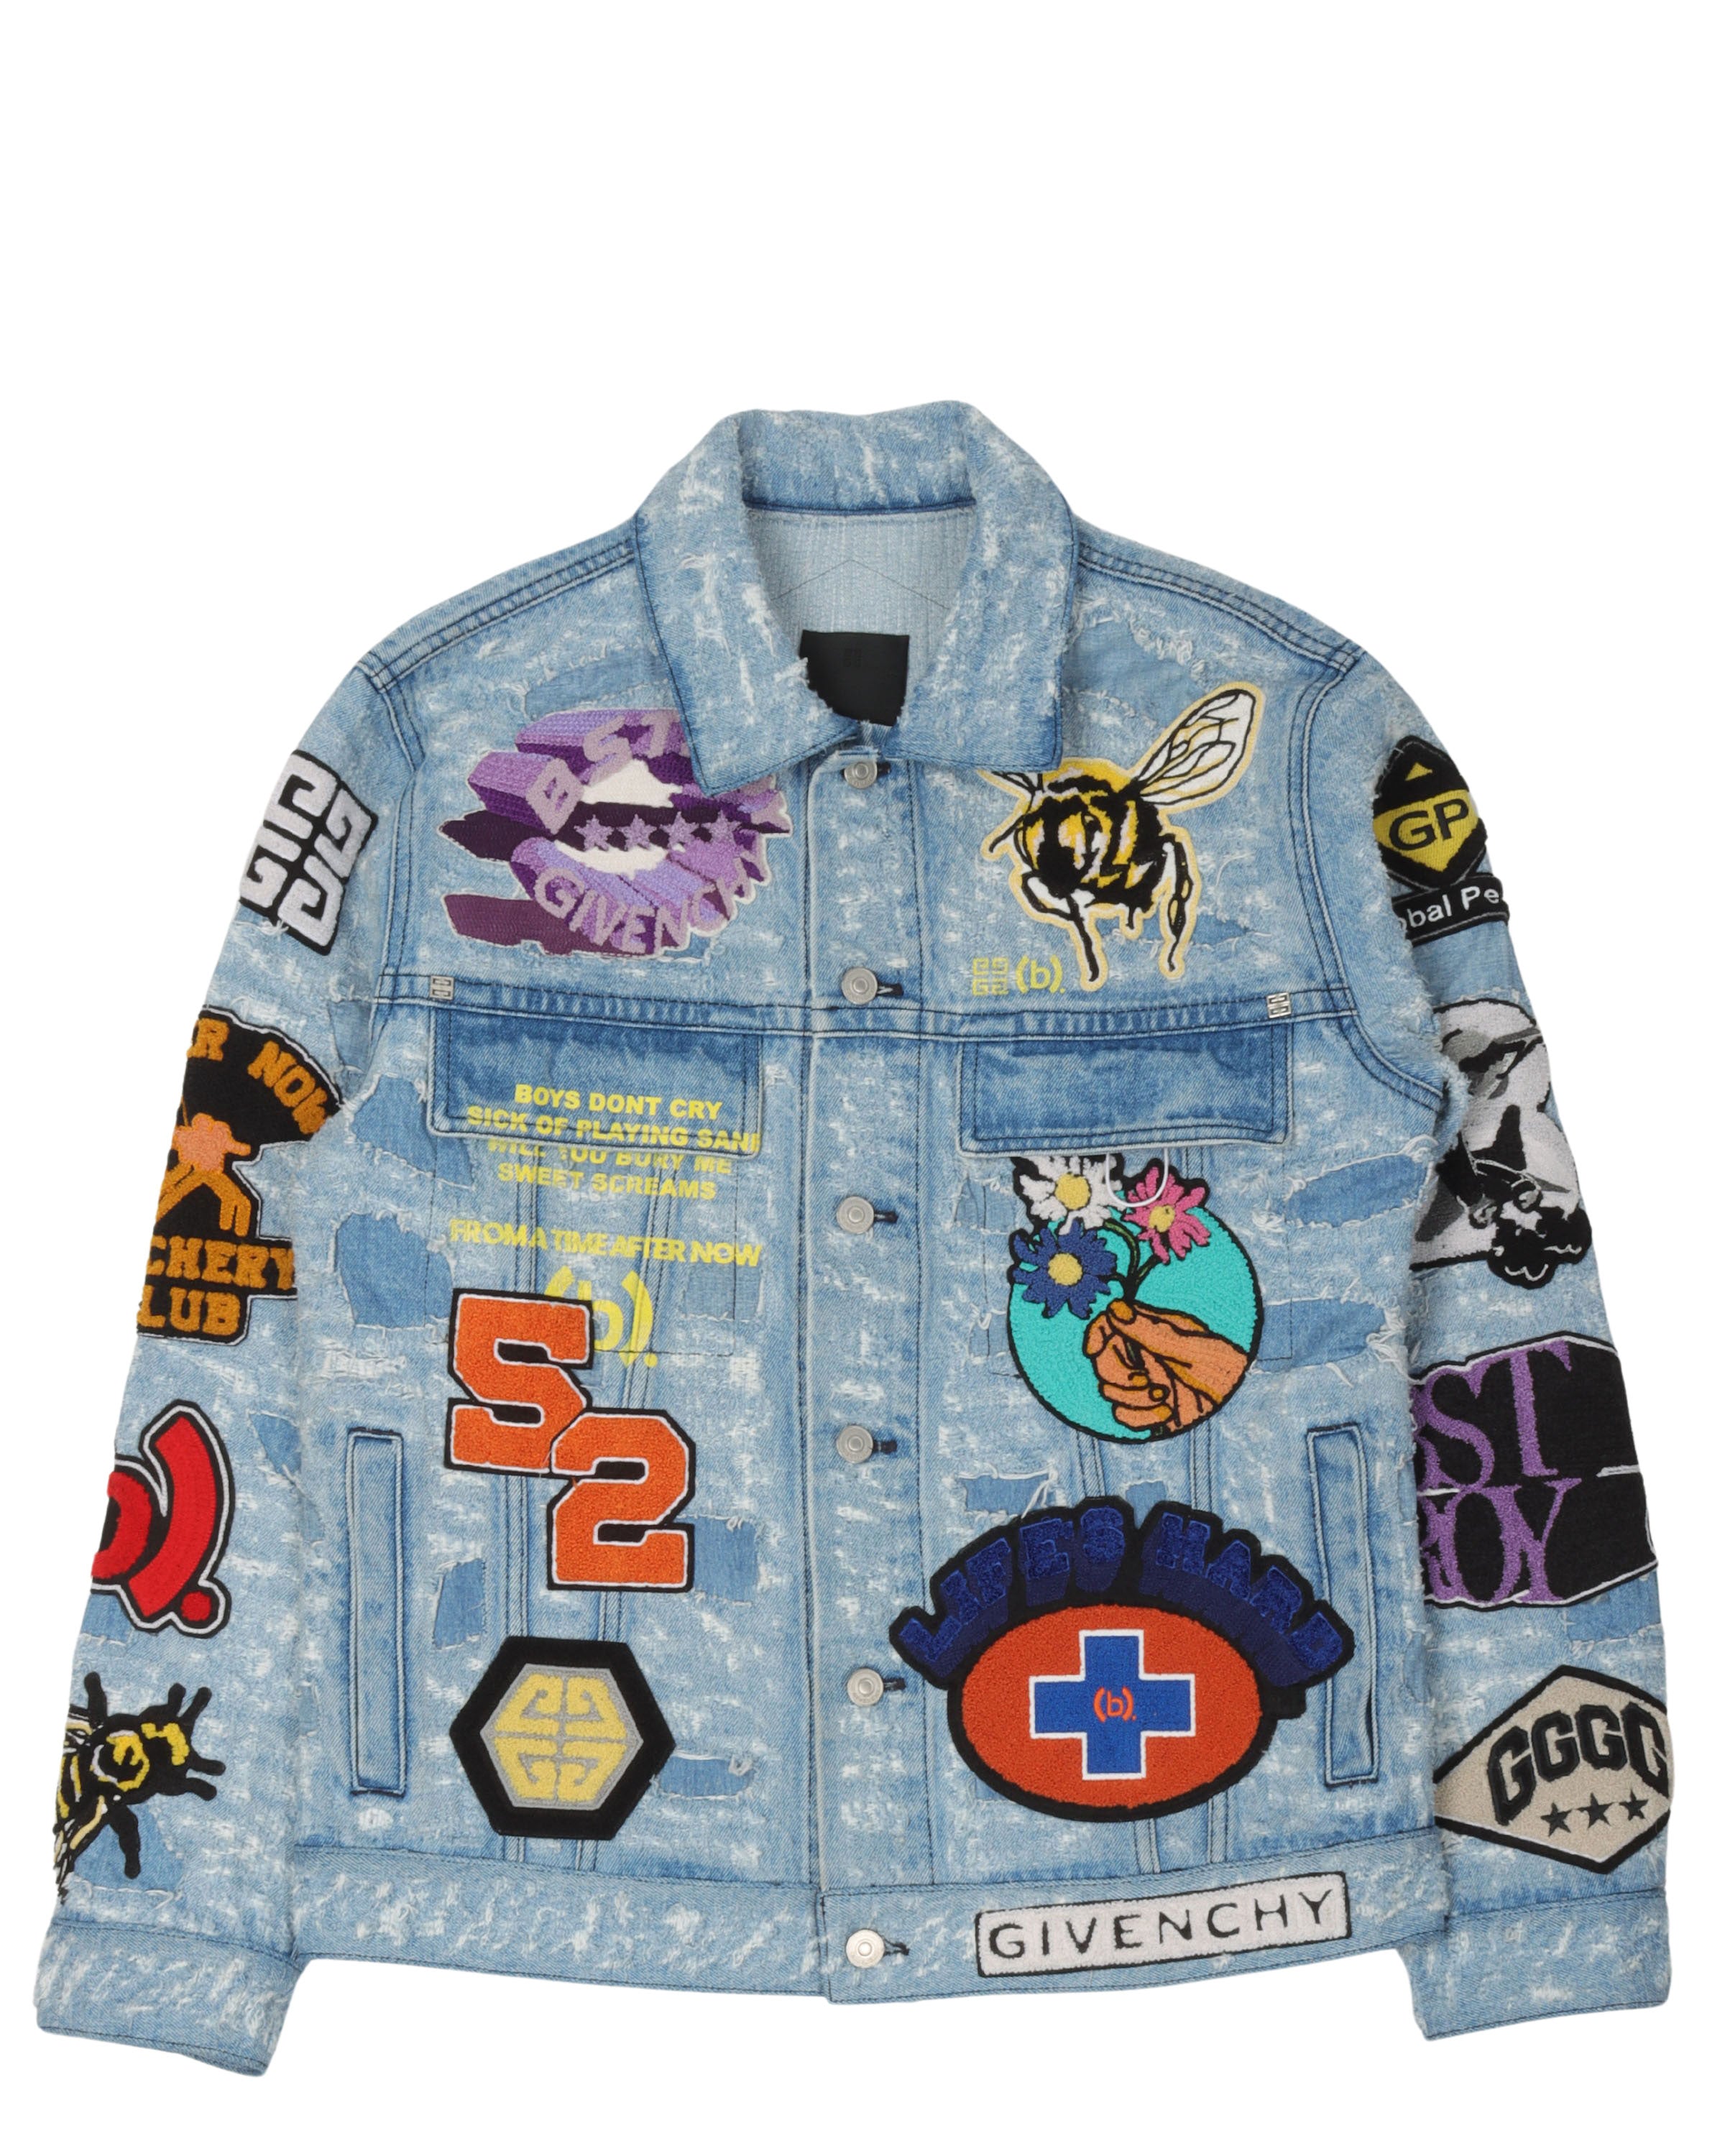 Blue denim jacket with patches